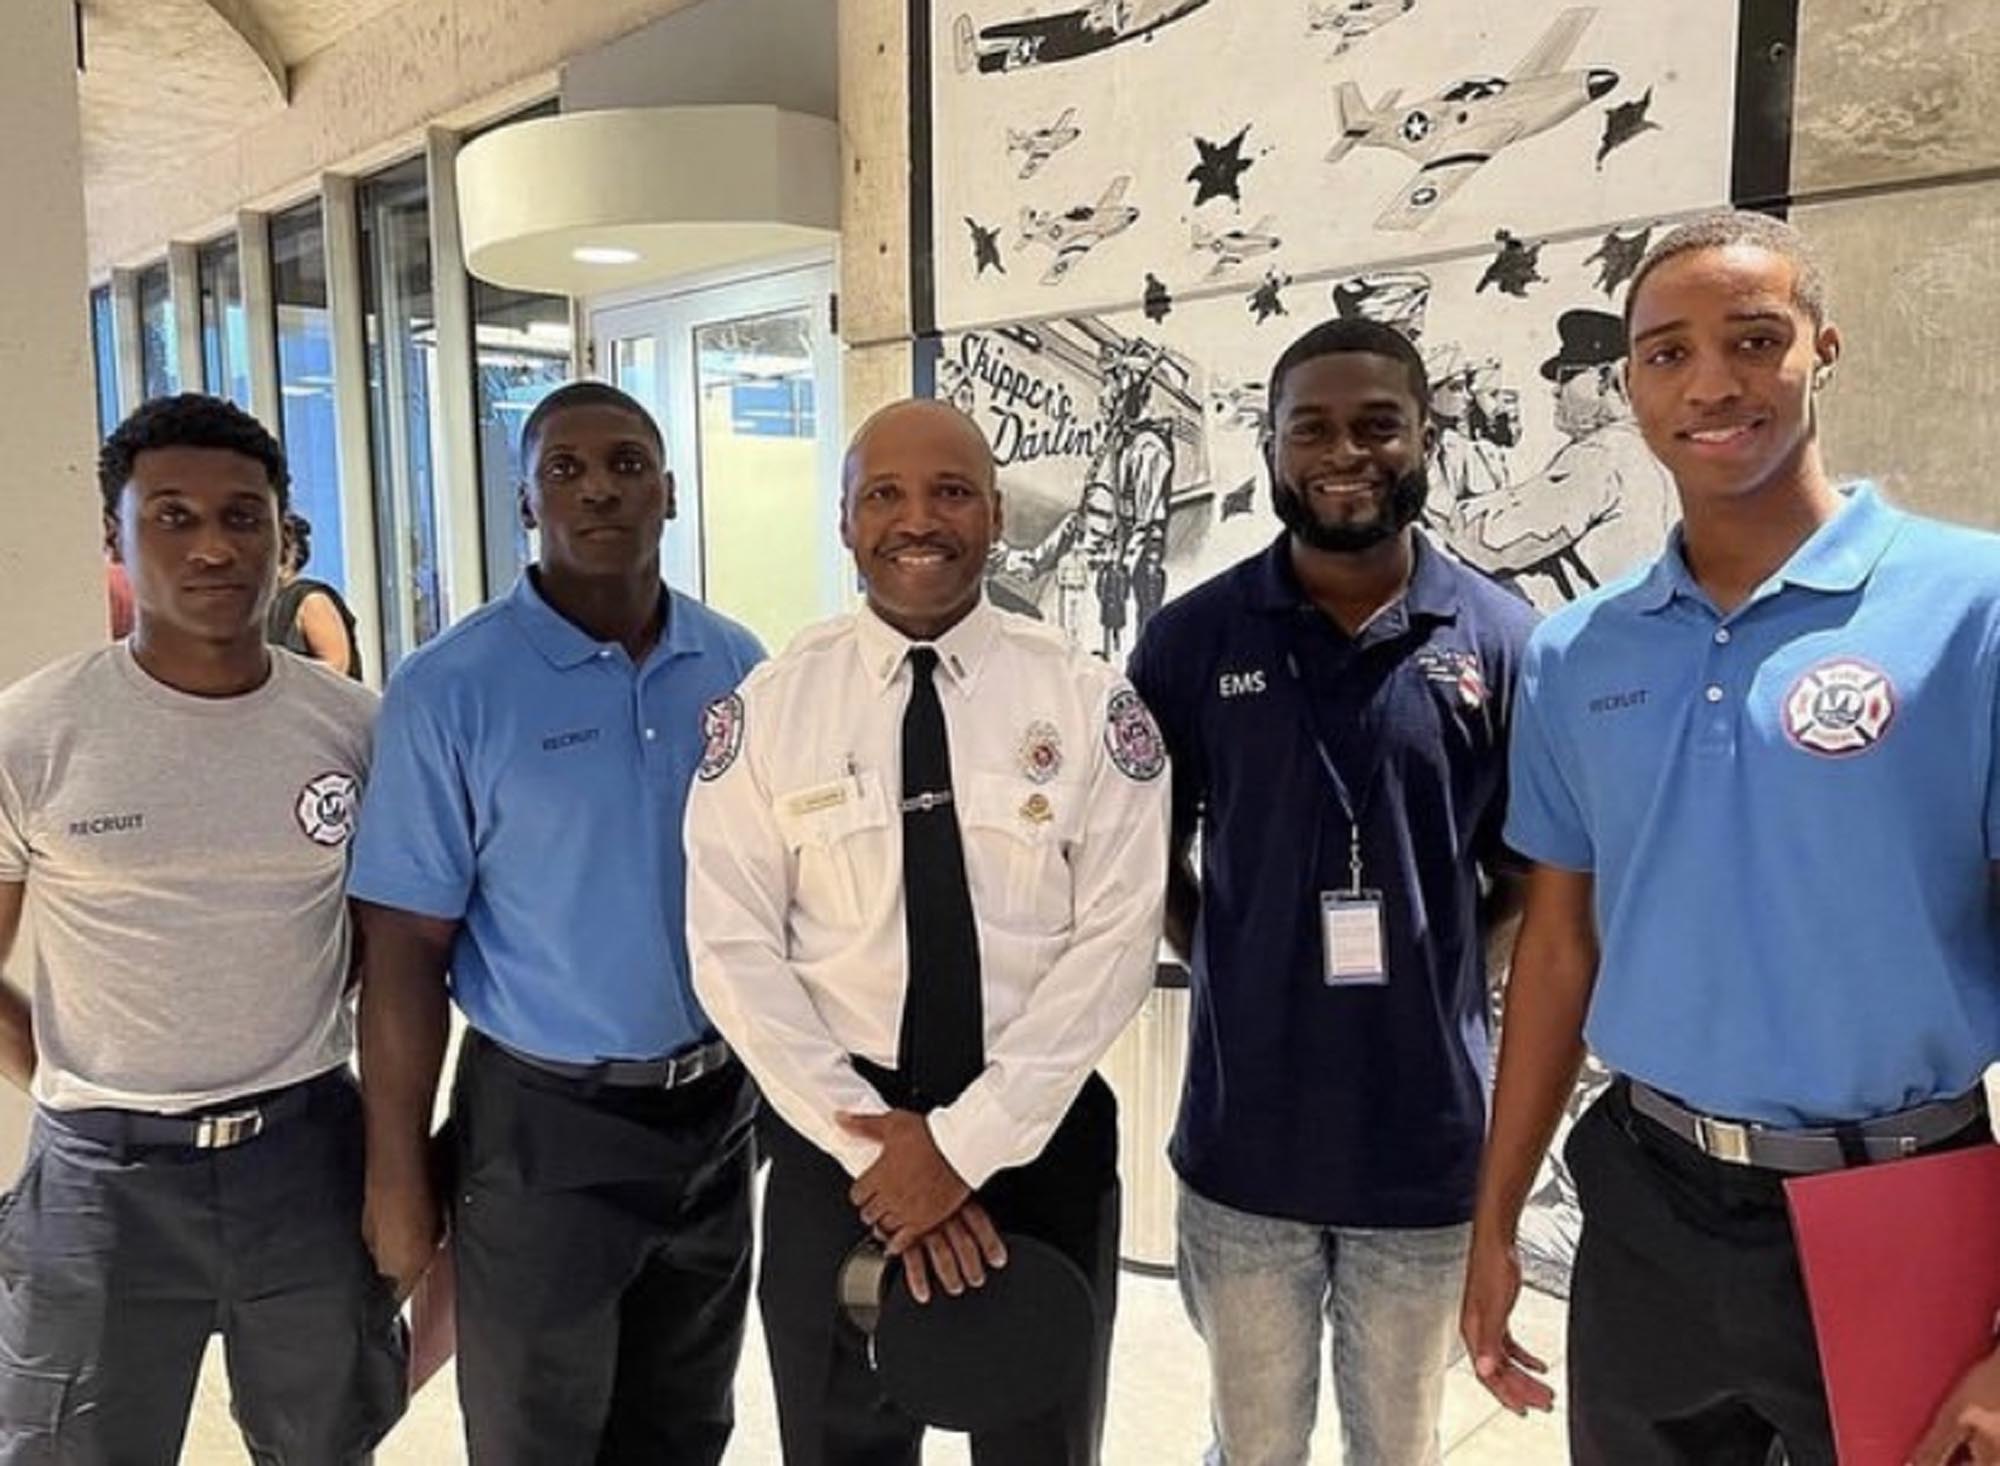 Recent Miami-Dade fire school graduates from the OYC Post High program